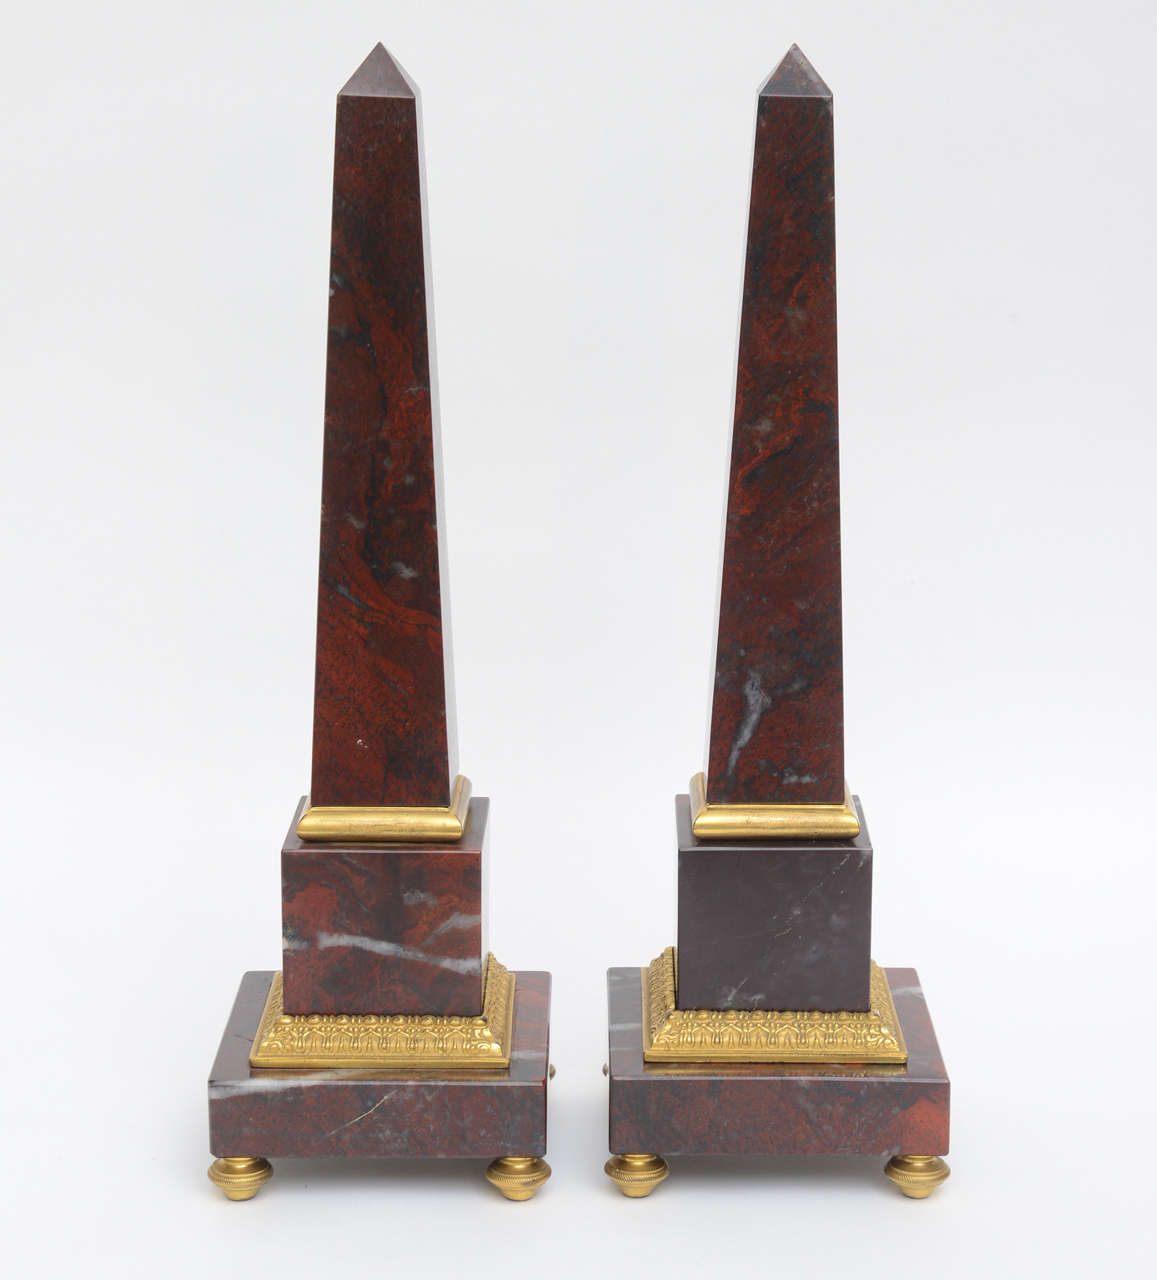 Large pair of obelisks made in a rosso antico marble with charcoal and white veining on brass platform footed square bases, with ferrule ball feet. Center of obelisks has acanthus leaf perimeter detail designs, with brass pencil surround and hobnail